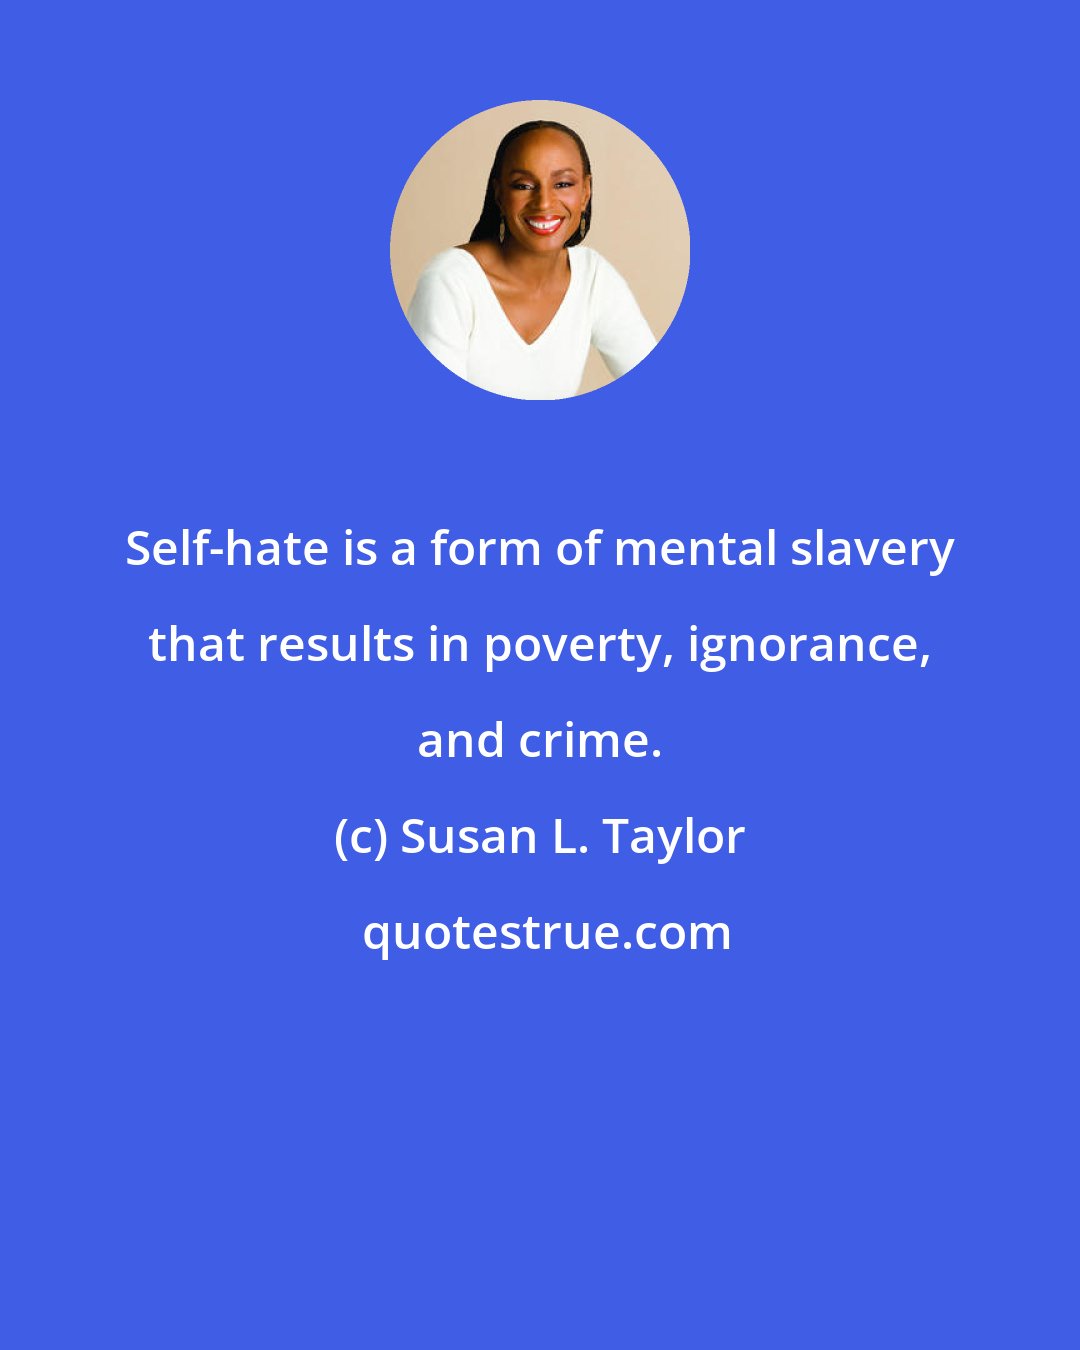 Susan L. Taylor: Self-hate is a form of mental slavery that results in poverty, ignorance, and crime.